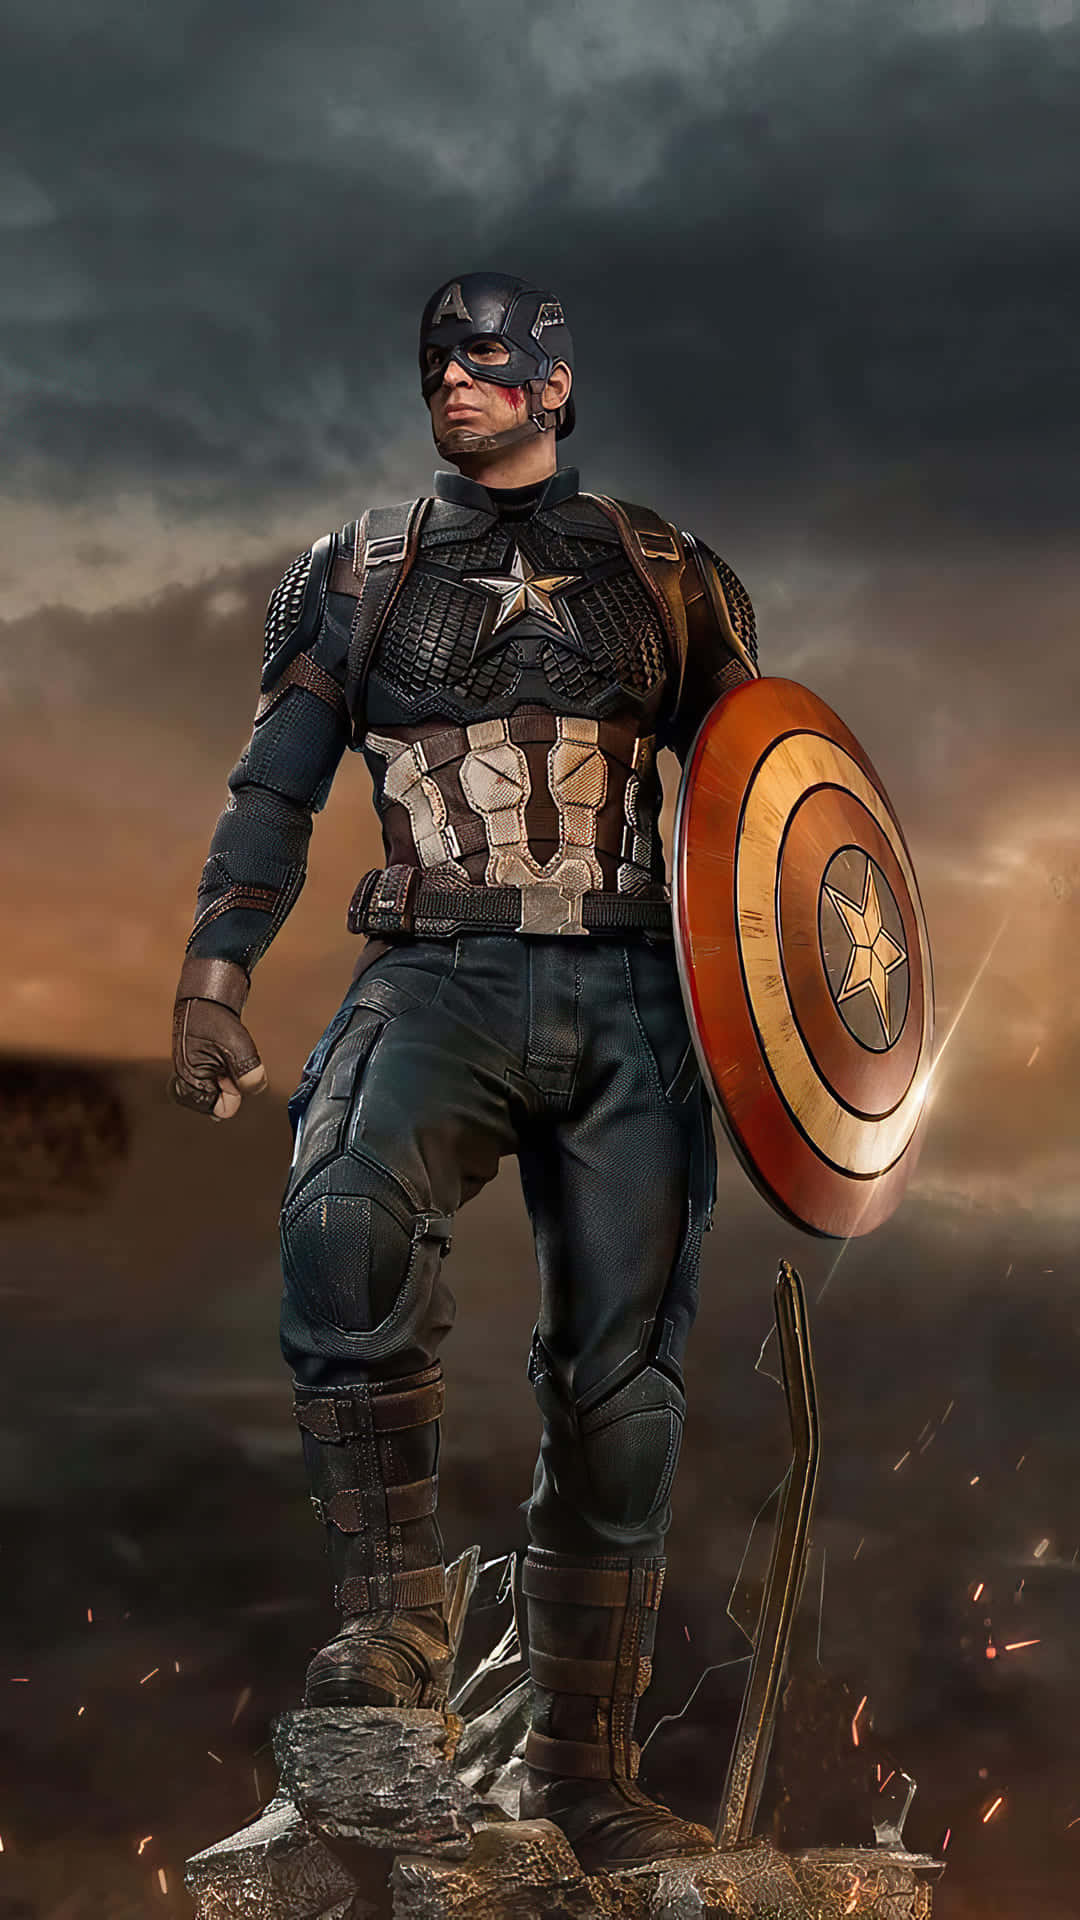 Captain America uses his Super Soldier strength to fight against evil forces